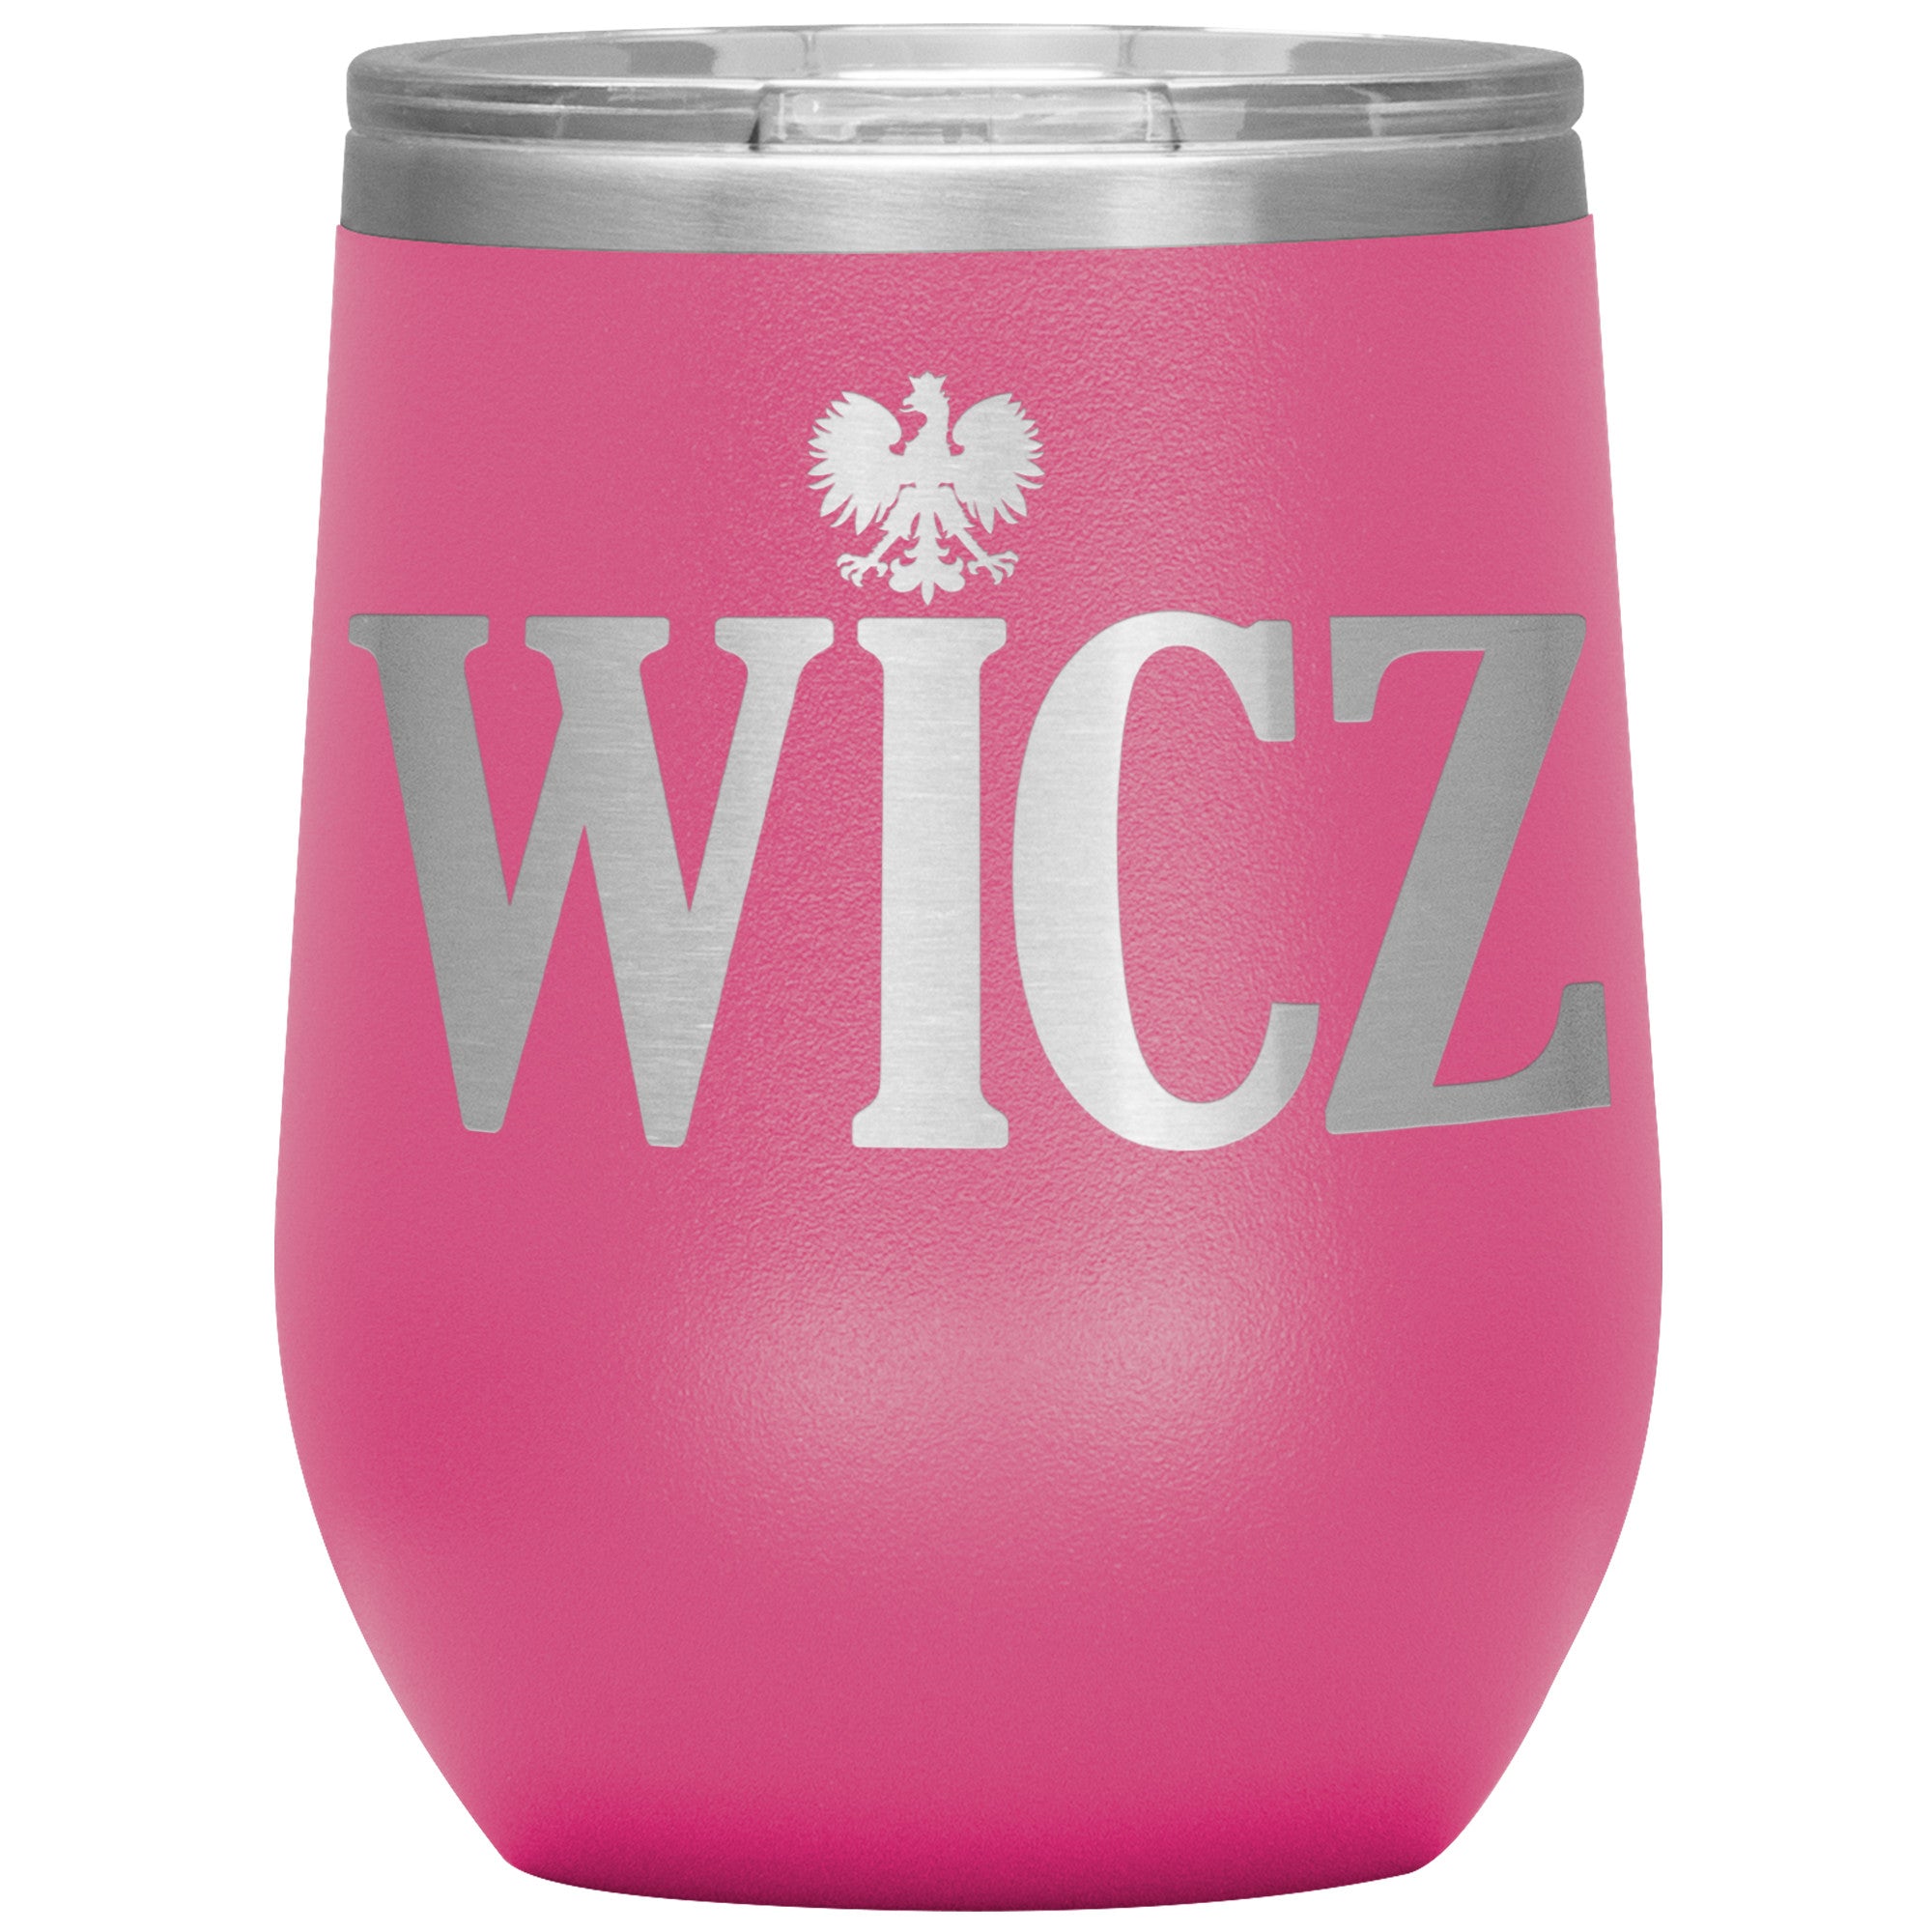 Polish Surname Ending in WICZ Insulated Wine Tumbler Tumblers teelaunch Pink  